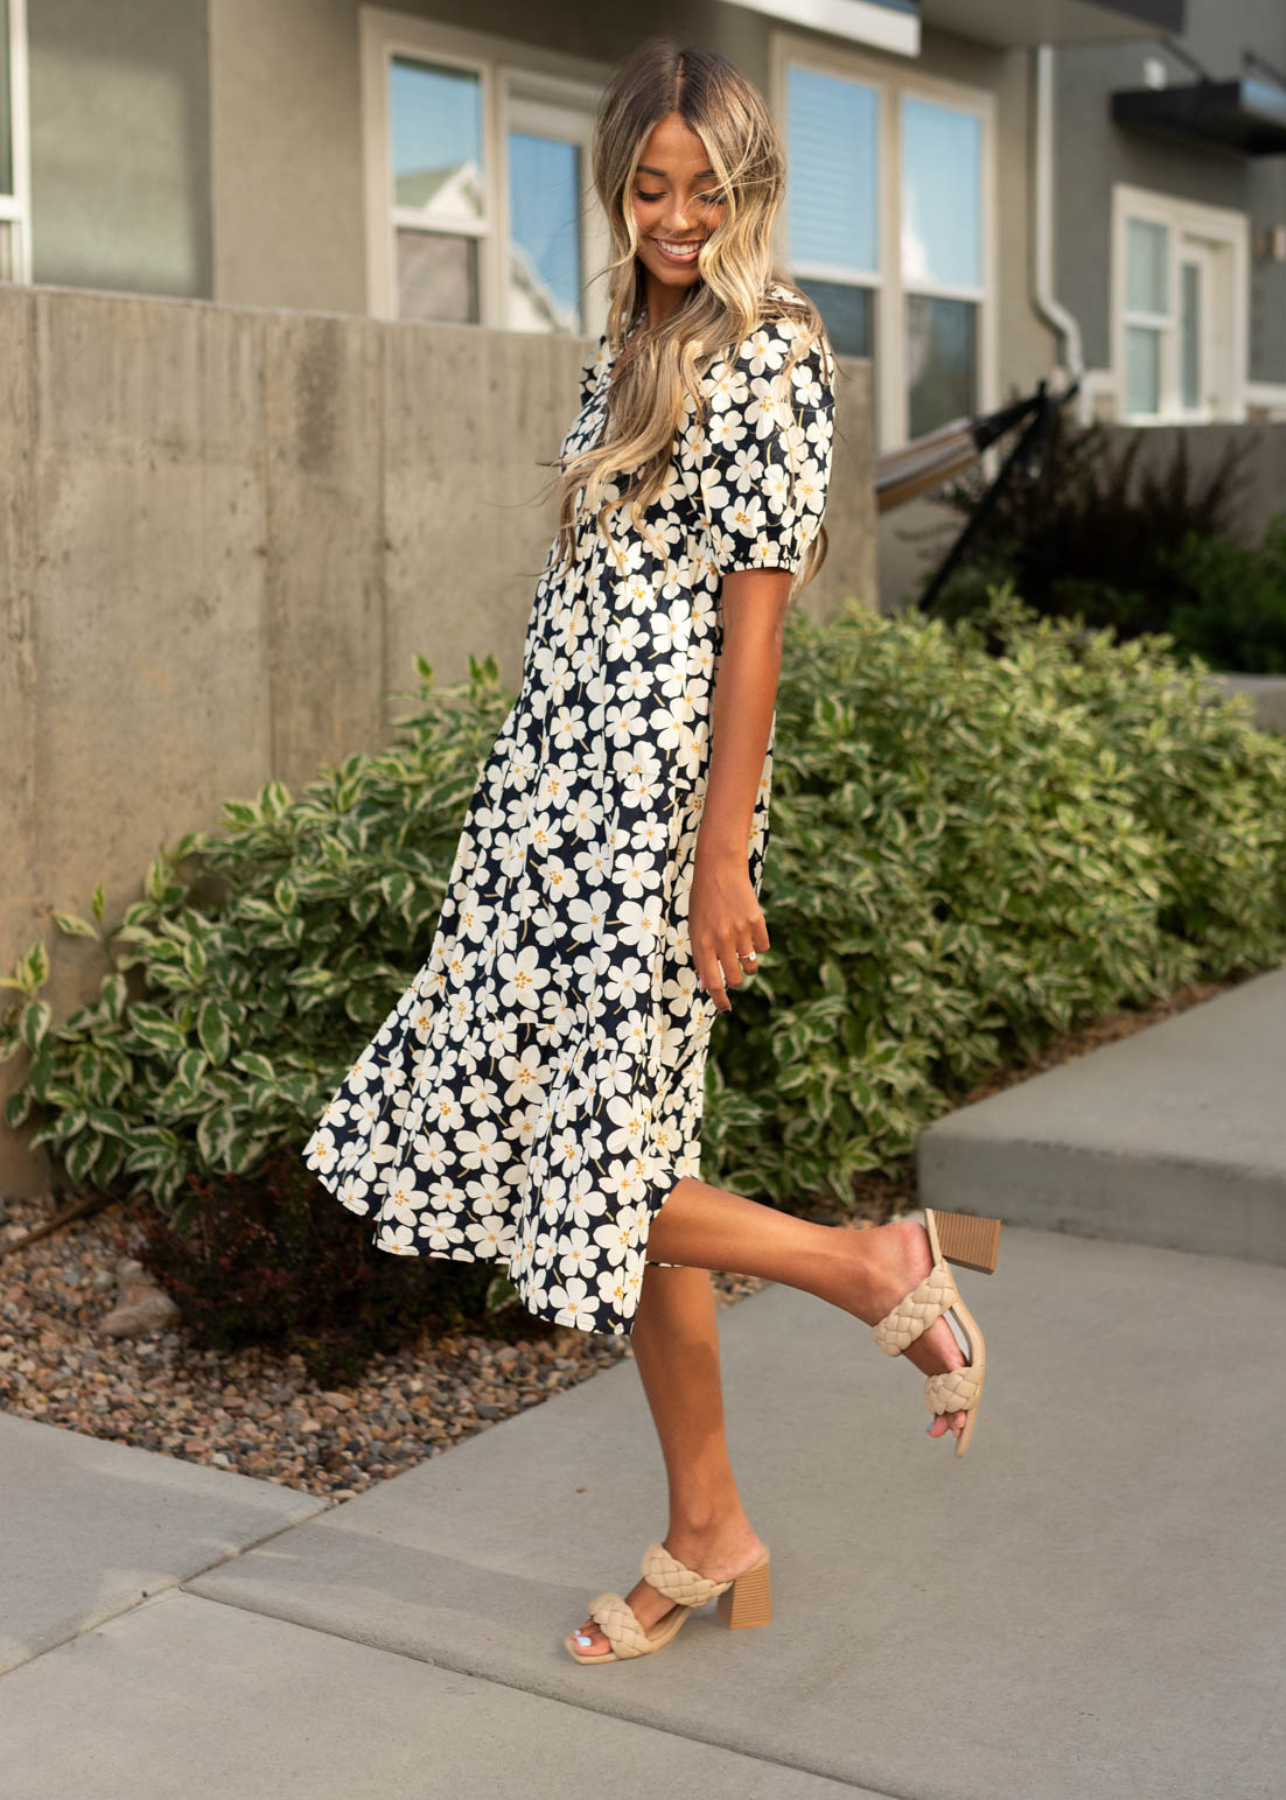 Ivory dress with floral print